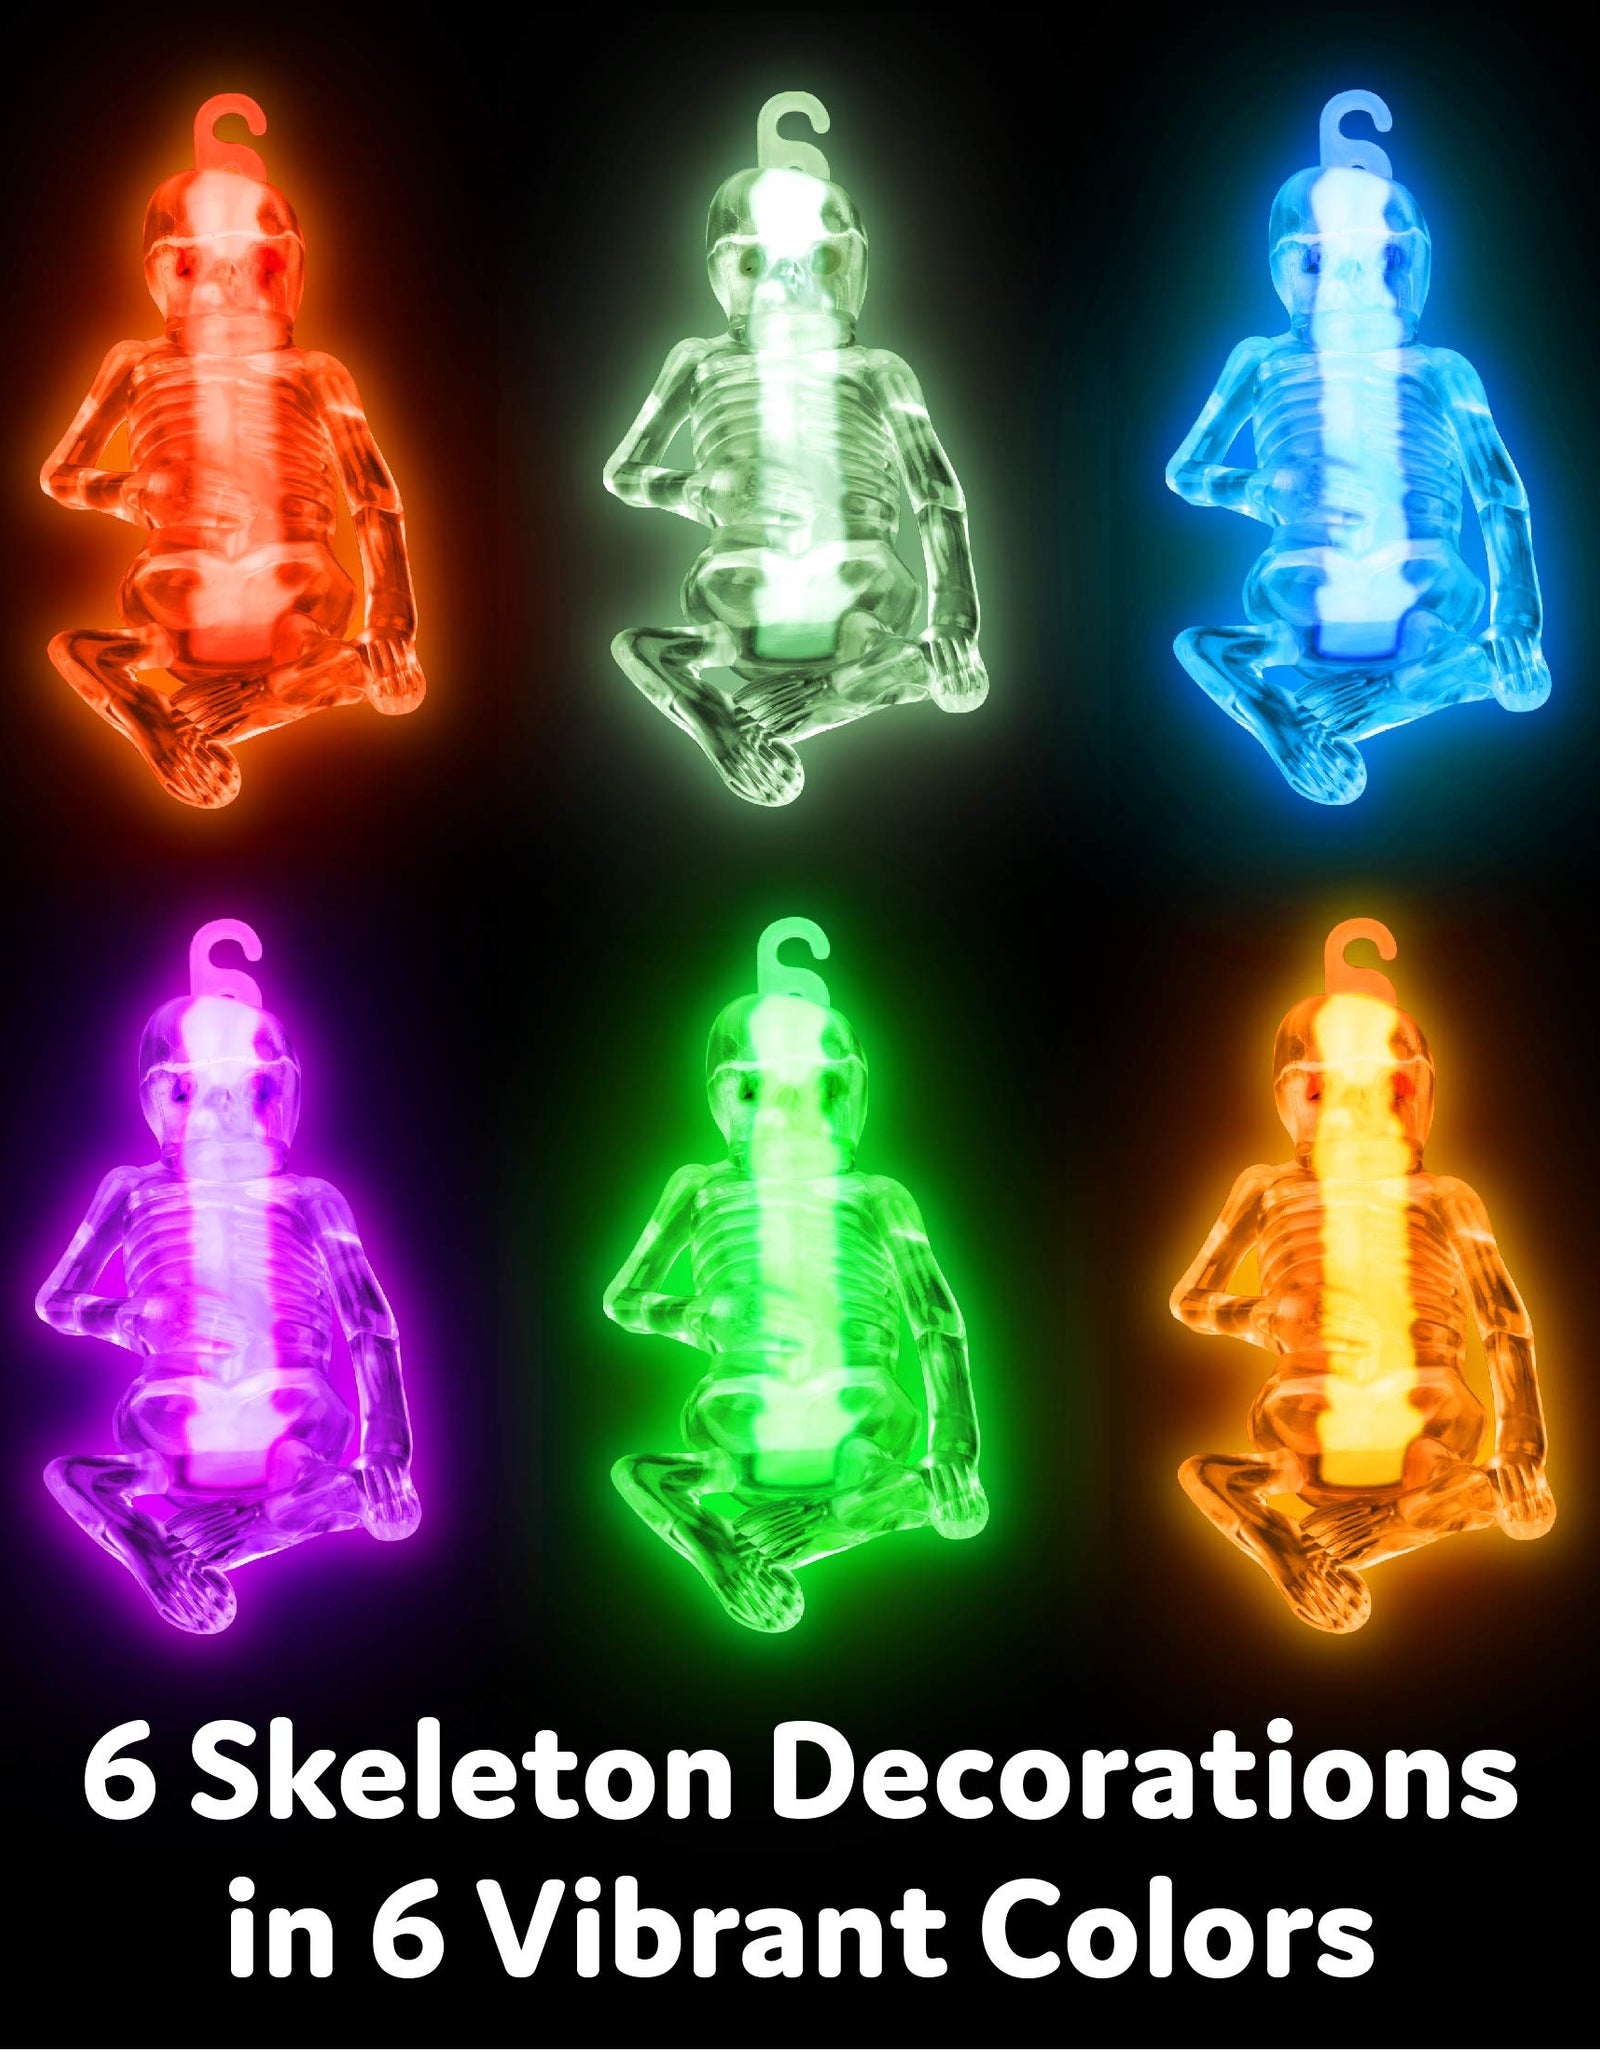 PartySticks Glow Party Skeleton Kit Party Favors for Kids - 24pk Glow in The Dark Party Decorations with 15 Glow Sticks, 3 Skeletons, 3 Spider Rings, and 3 Glow Bracelet Connectors